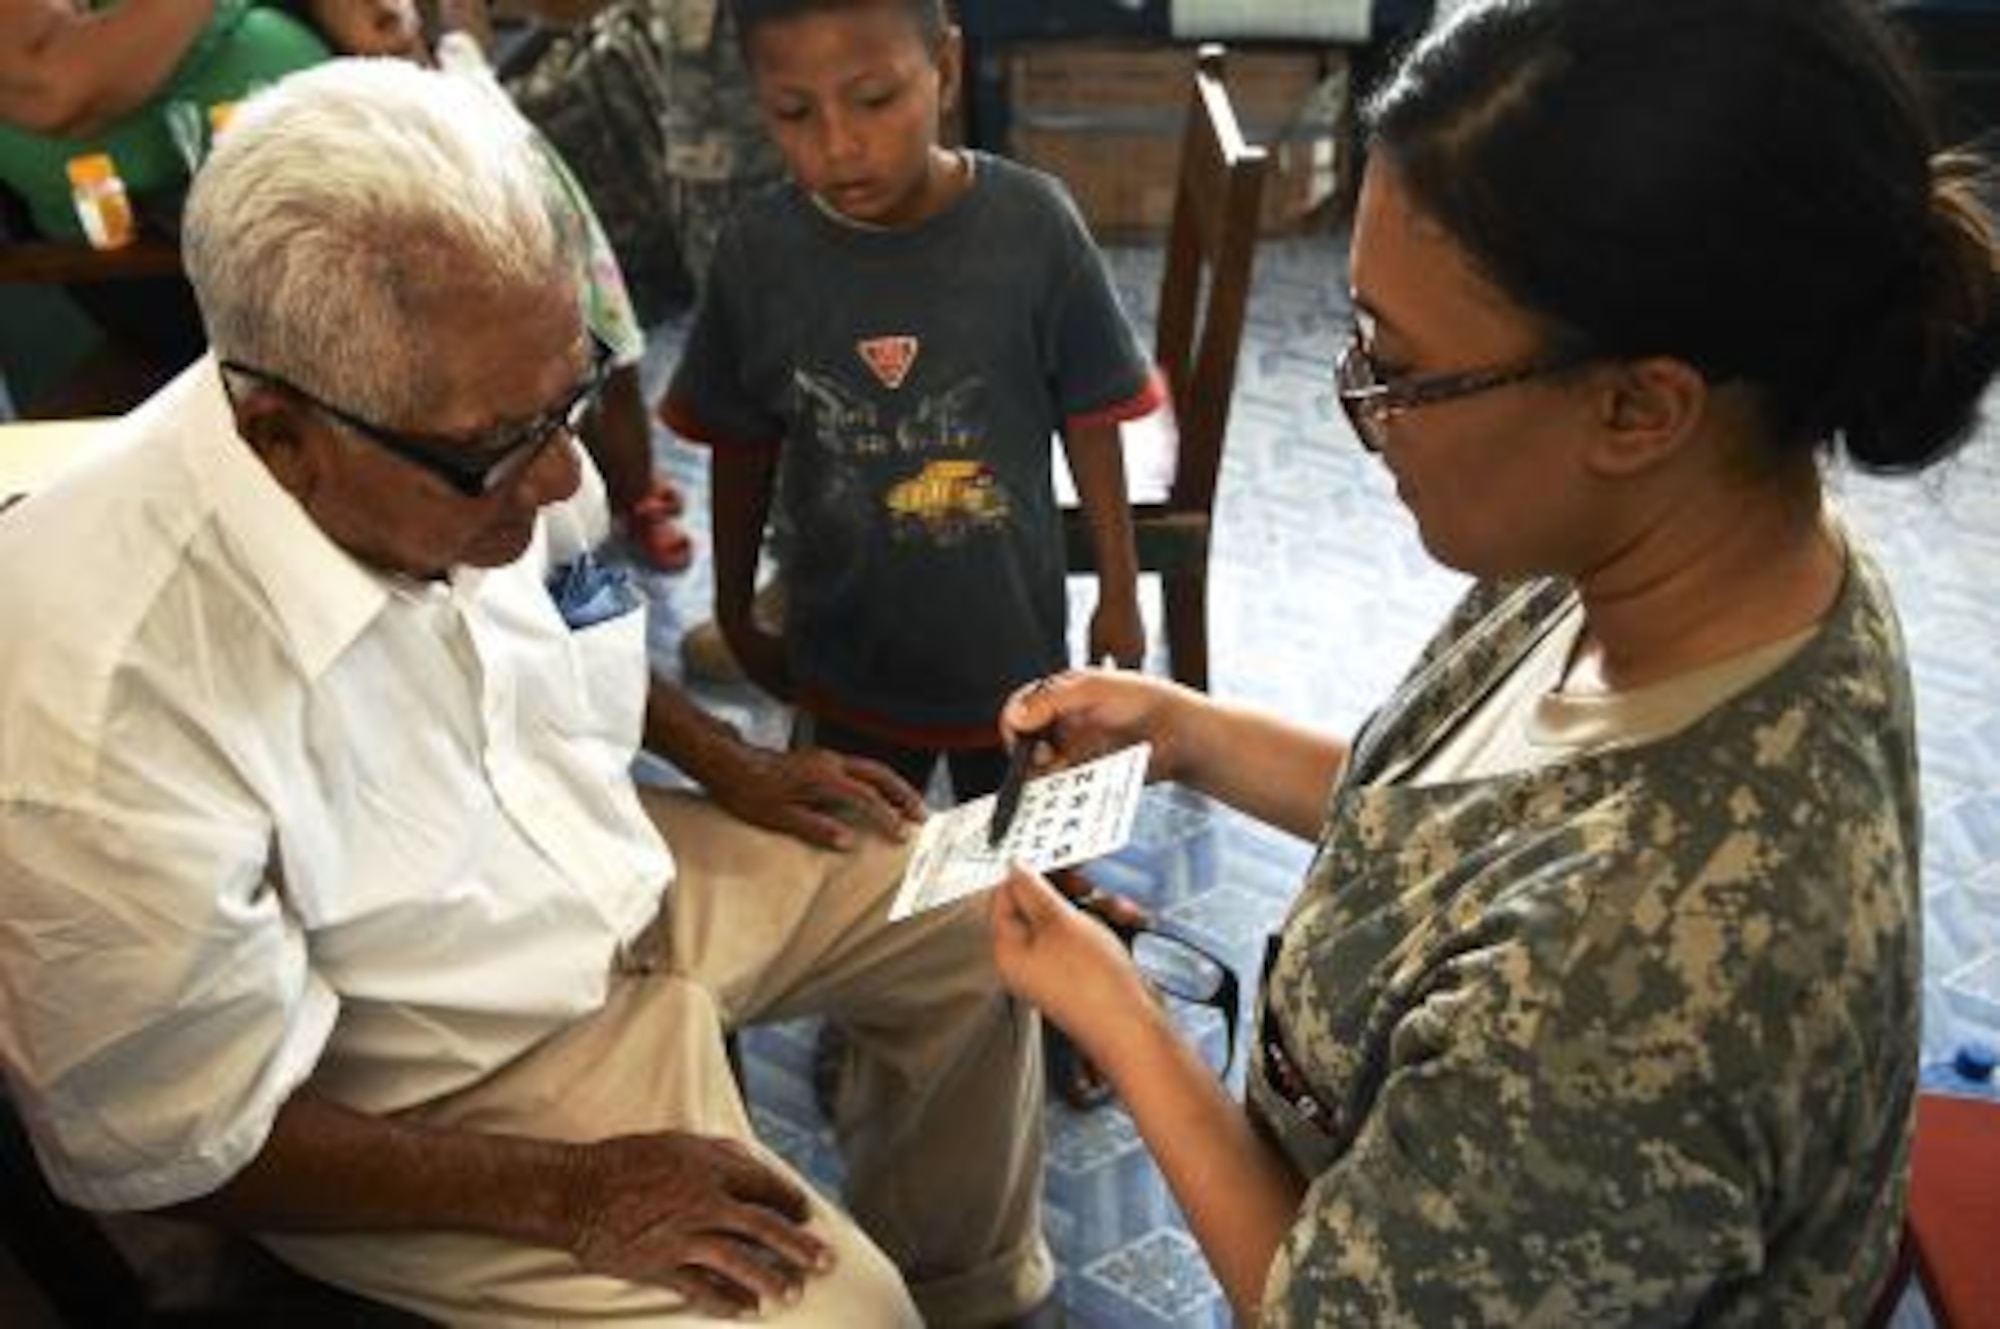 U.S. Army Pfc. Sierra Chanel, optical lab specialist assigned to the 362nd Medical Logistics Company, checks a local resident’s vision at San Filipe School, Belize, April 24, 2013. Medical professionals from the U.S. and Canada provided free medical treatment during medical readiness training exercises throughout Belize as part of an on-going exercise known as New Horizons. The MEDRETES were designed to provide humanitarian assistance and medical care to people in several communities, while helping improve the skills of U.S. military medical forces. (U.S. Air Force photo by Master Sgt. James Law/Released)
